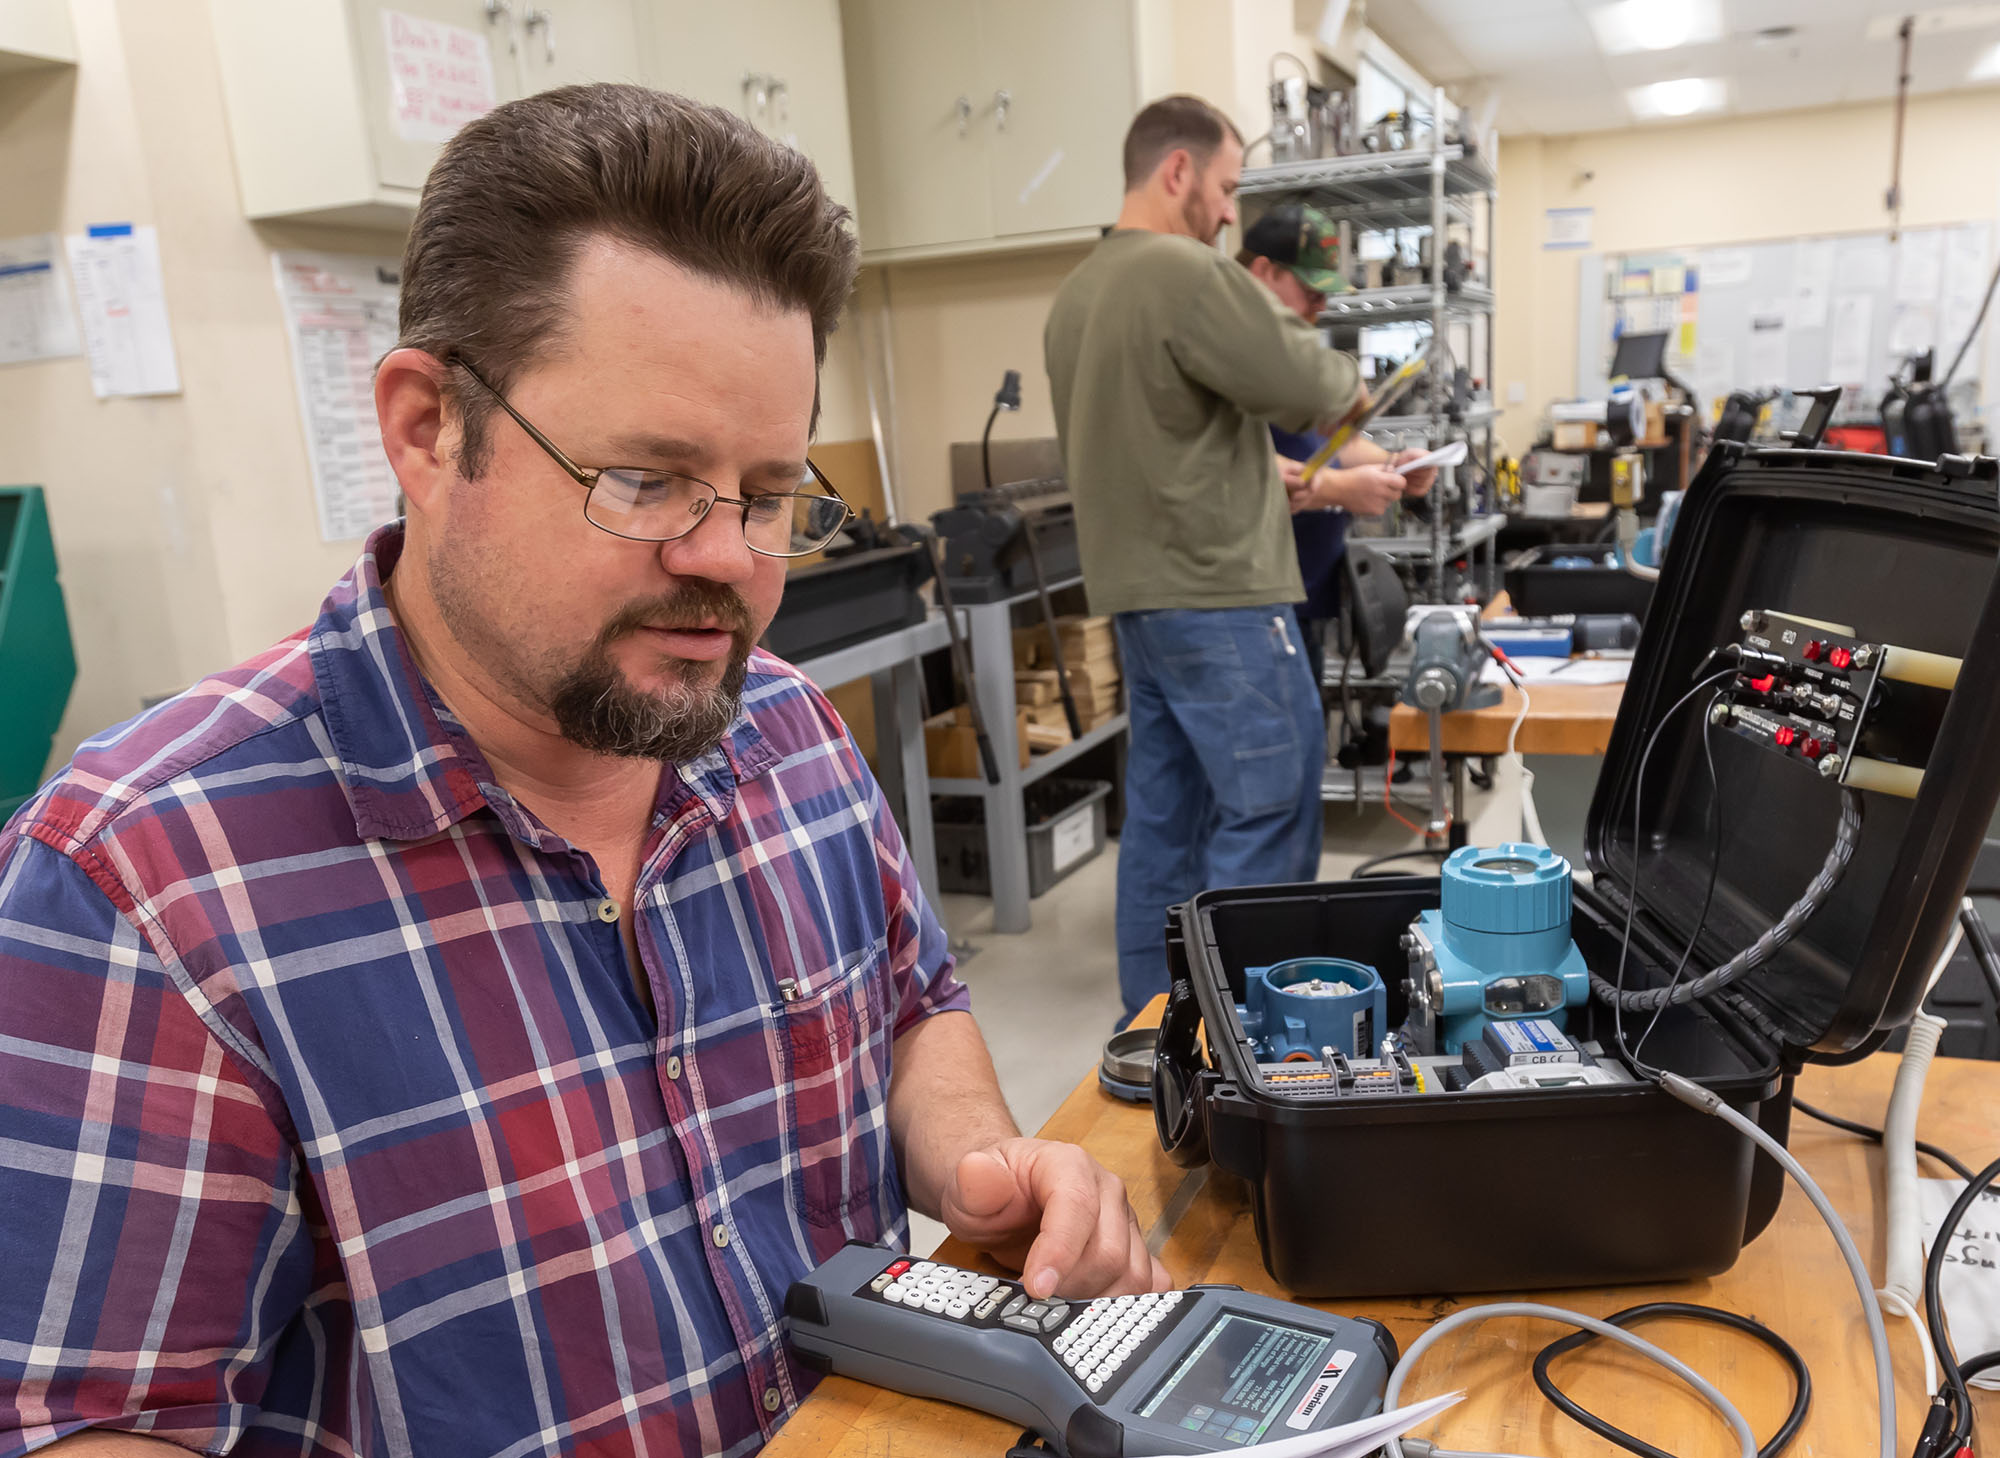 Mechatronics student working on project with specialized instrumentation at Sierra College